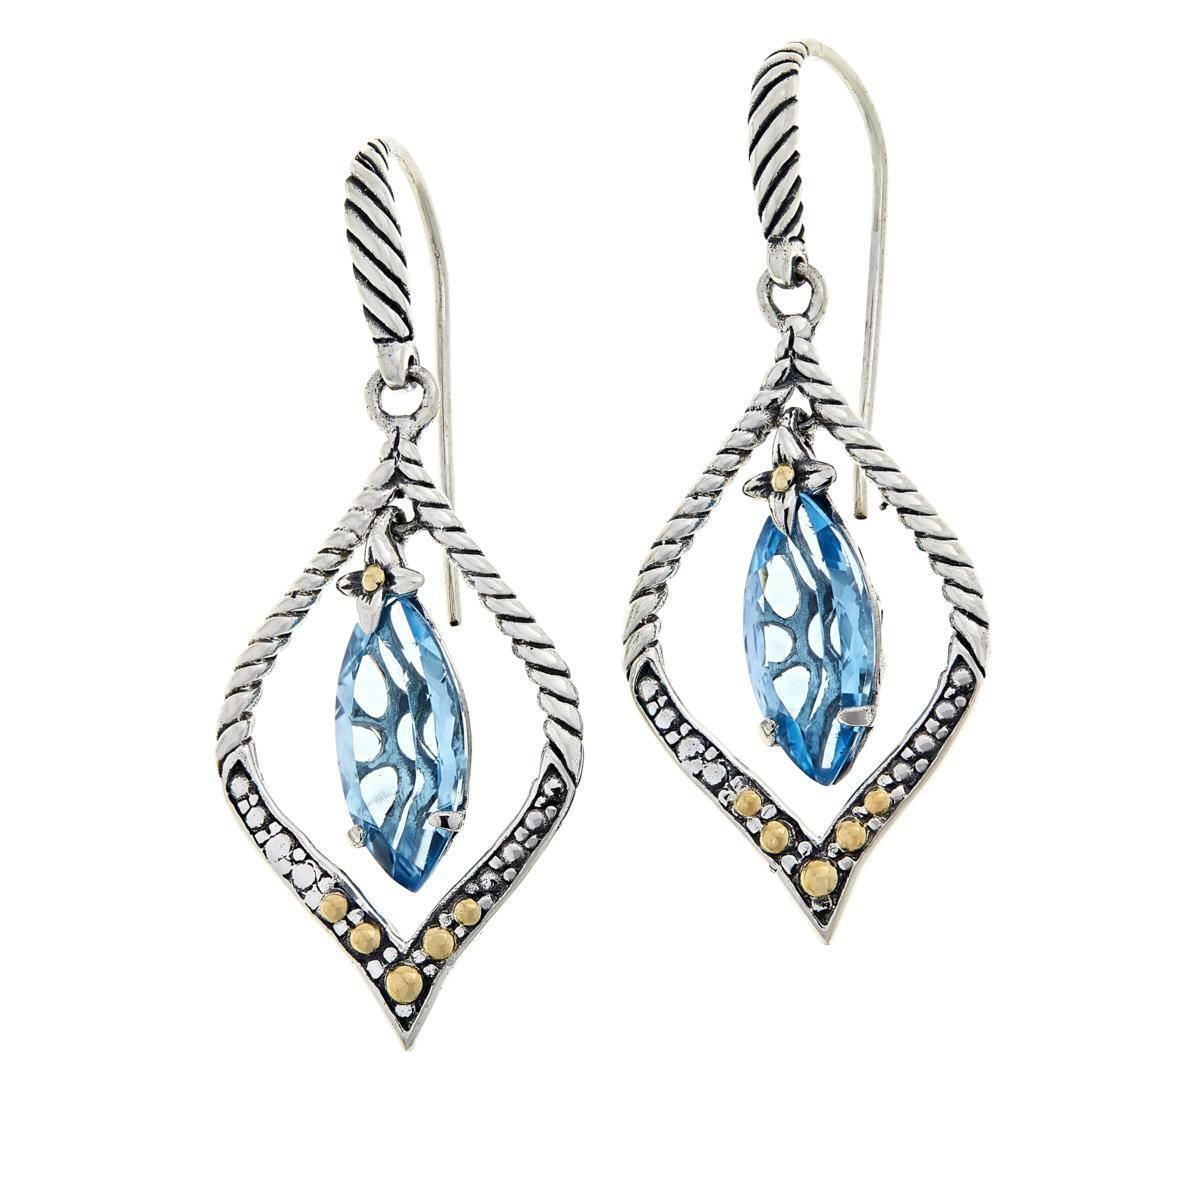 Bali Designs Marquise Blue Topaz Cable Hook Drop Earrings HSN $170.00